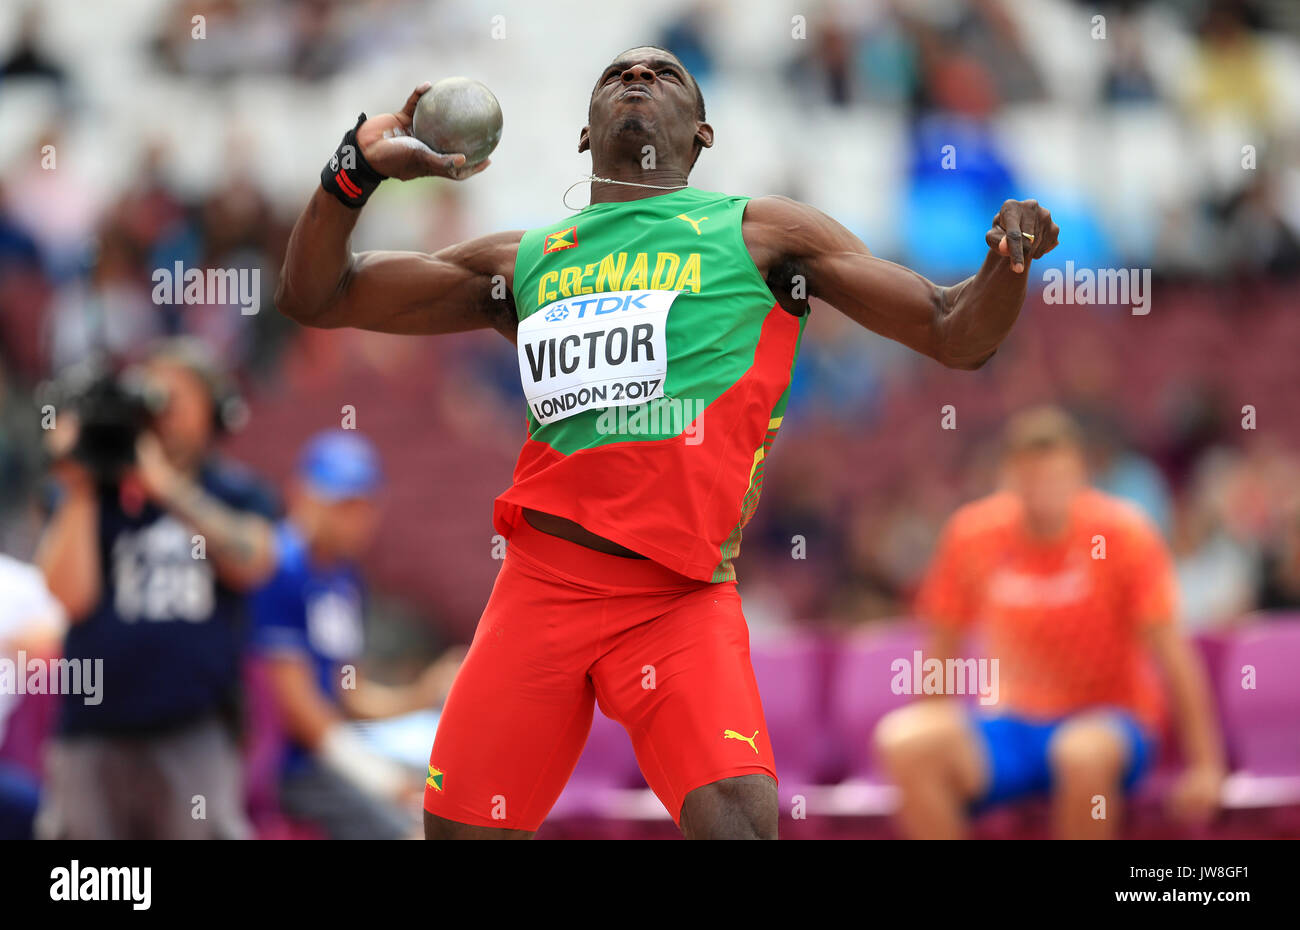 Greneda's Lindon Victor competes in the 